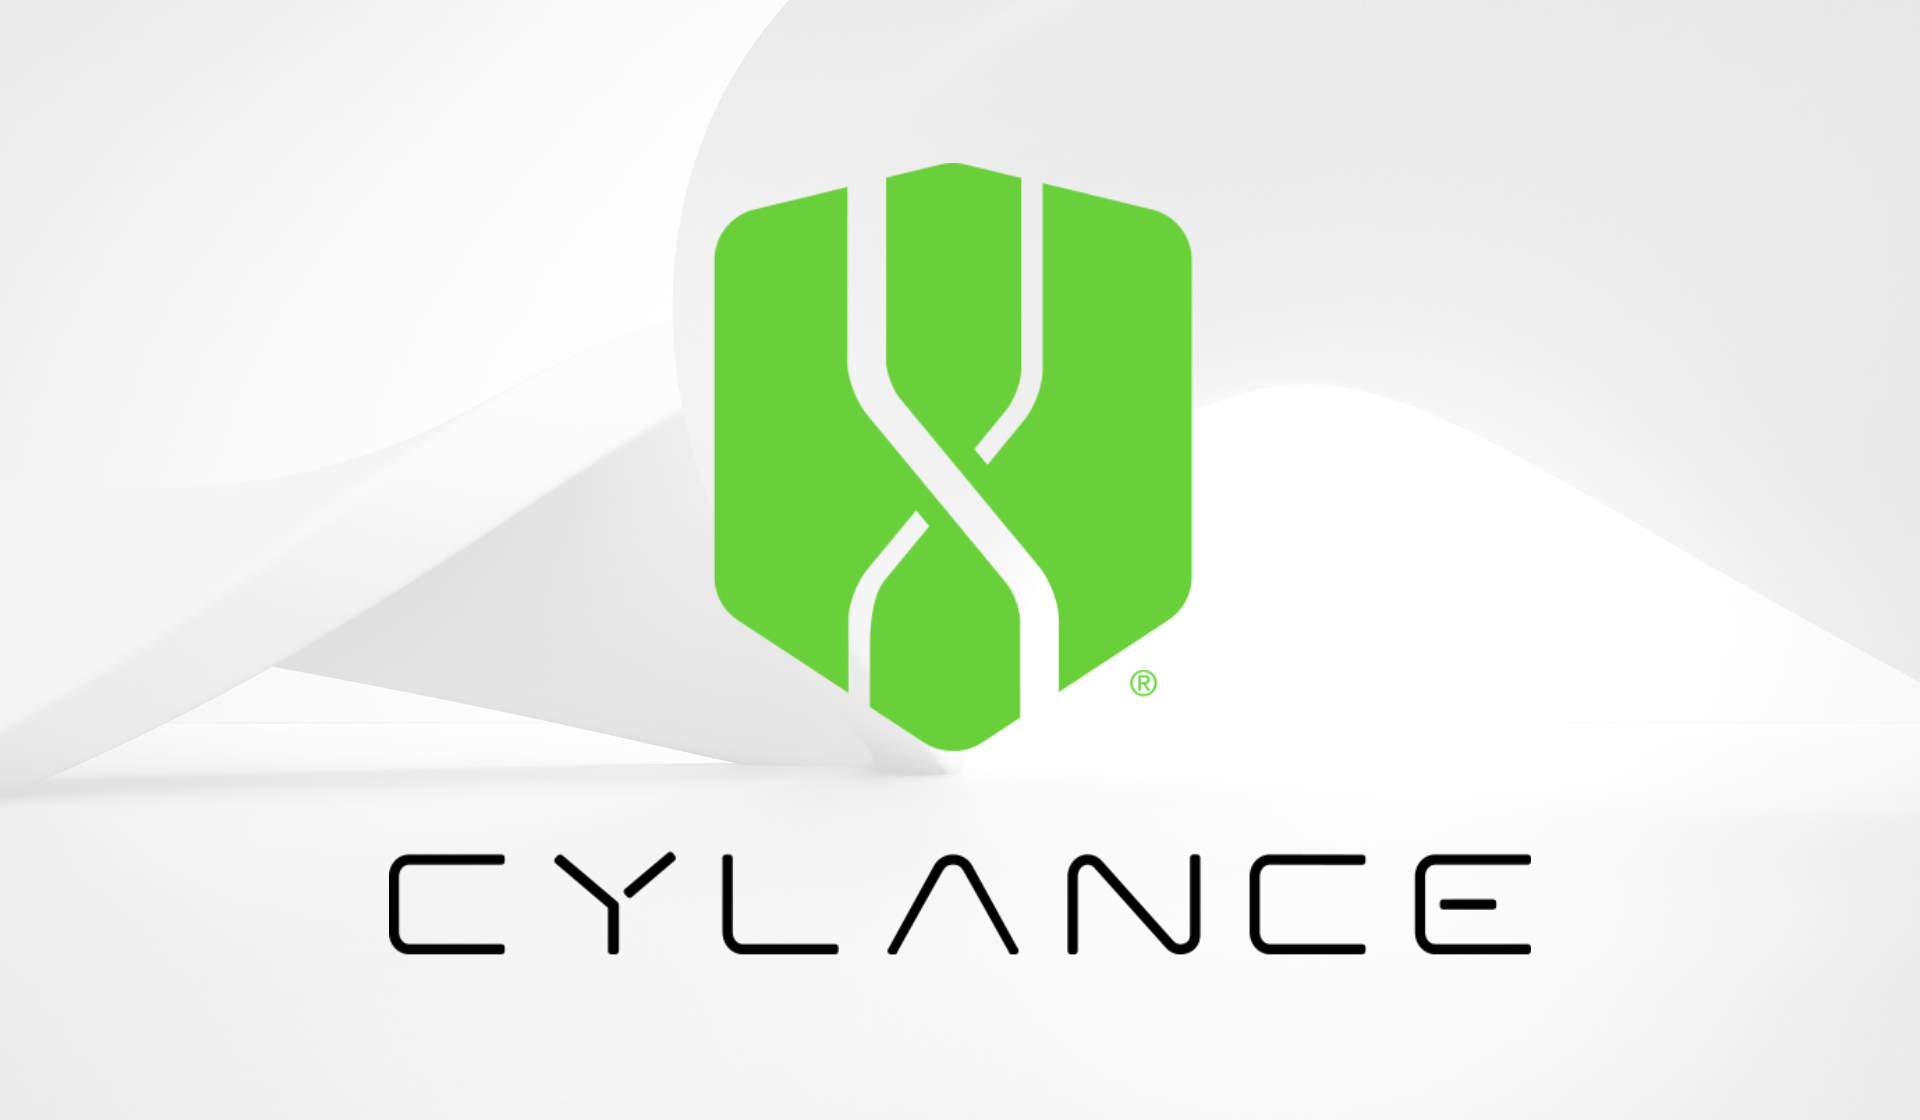 Is Cylance protect an antivirus?